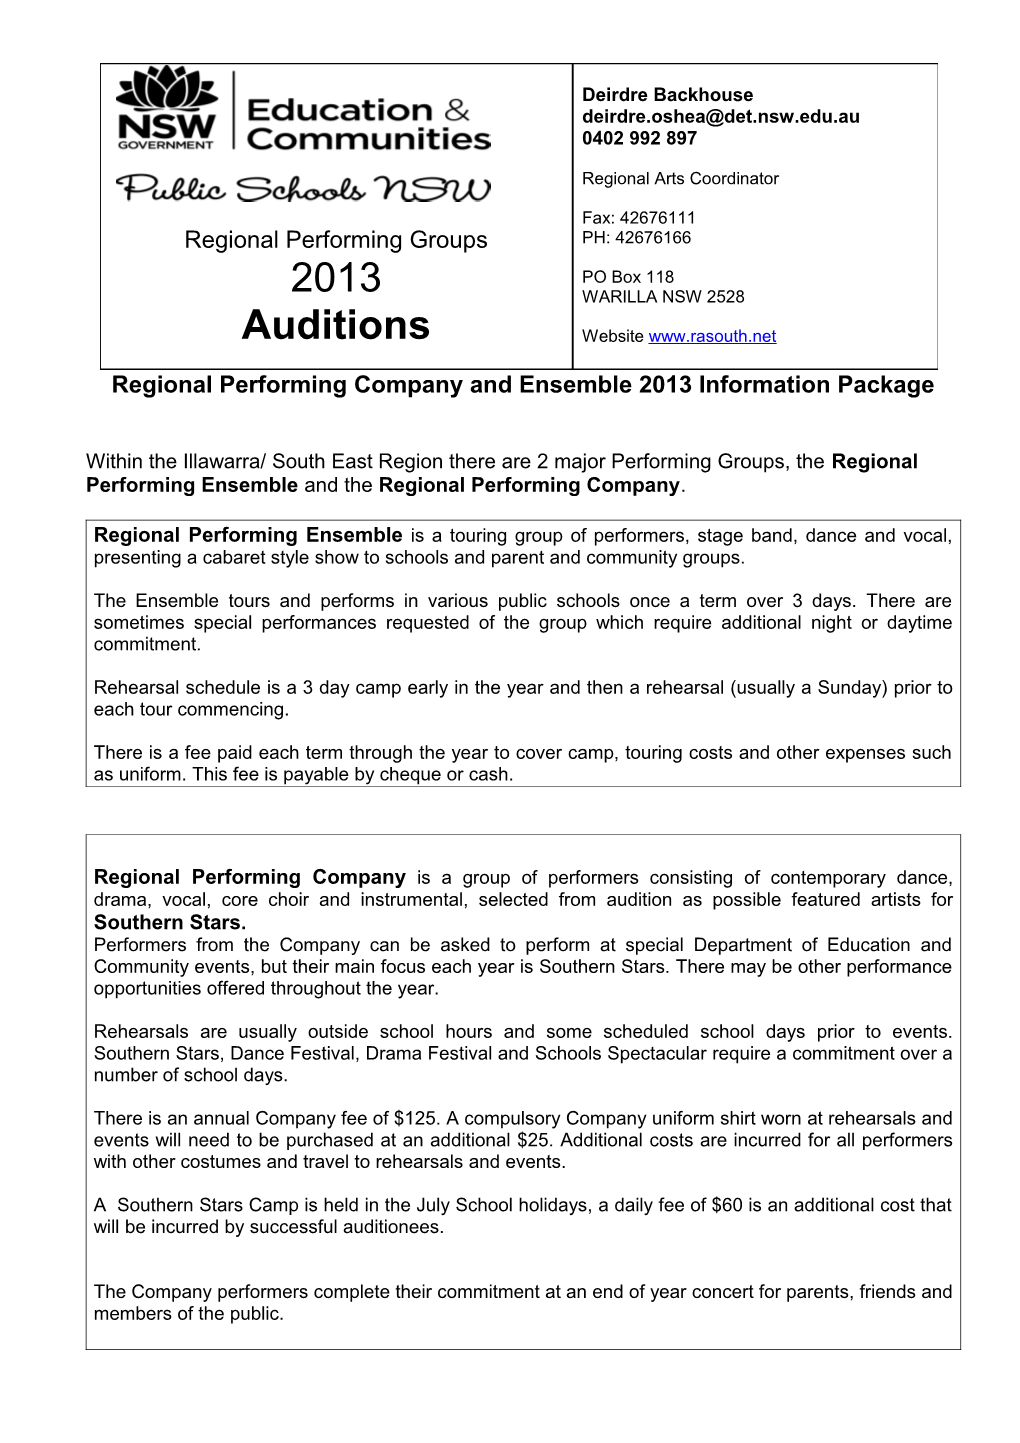 REGIONAL Auditionsfor the 2007 Regional Performing Groups, Including Southern Stars Are